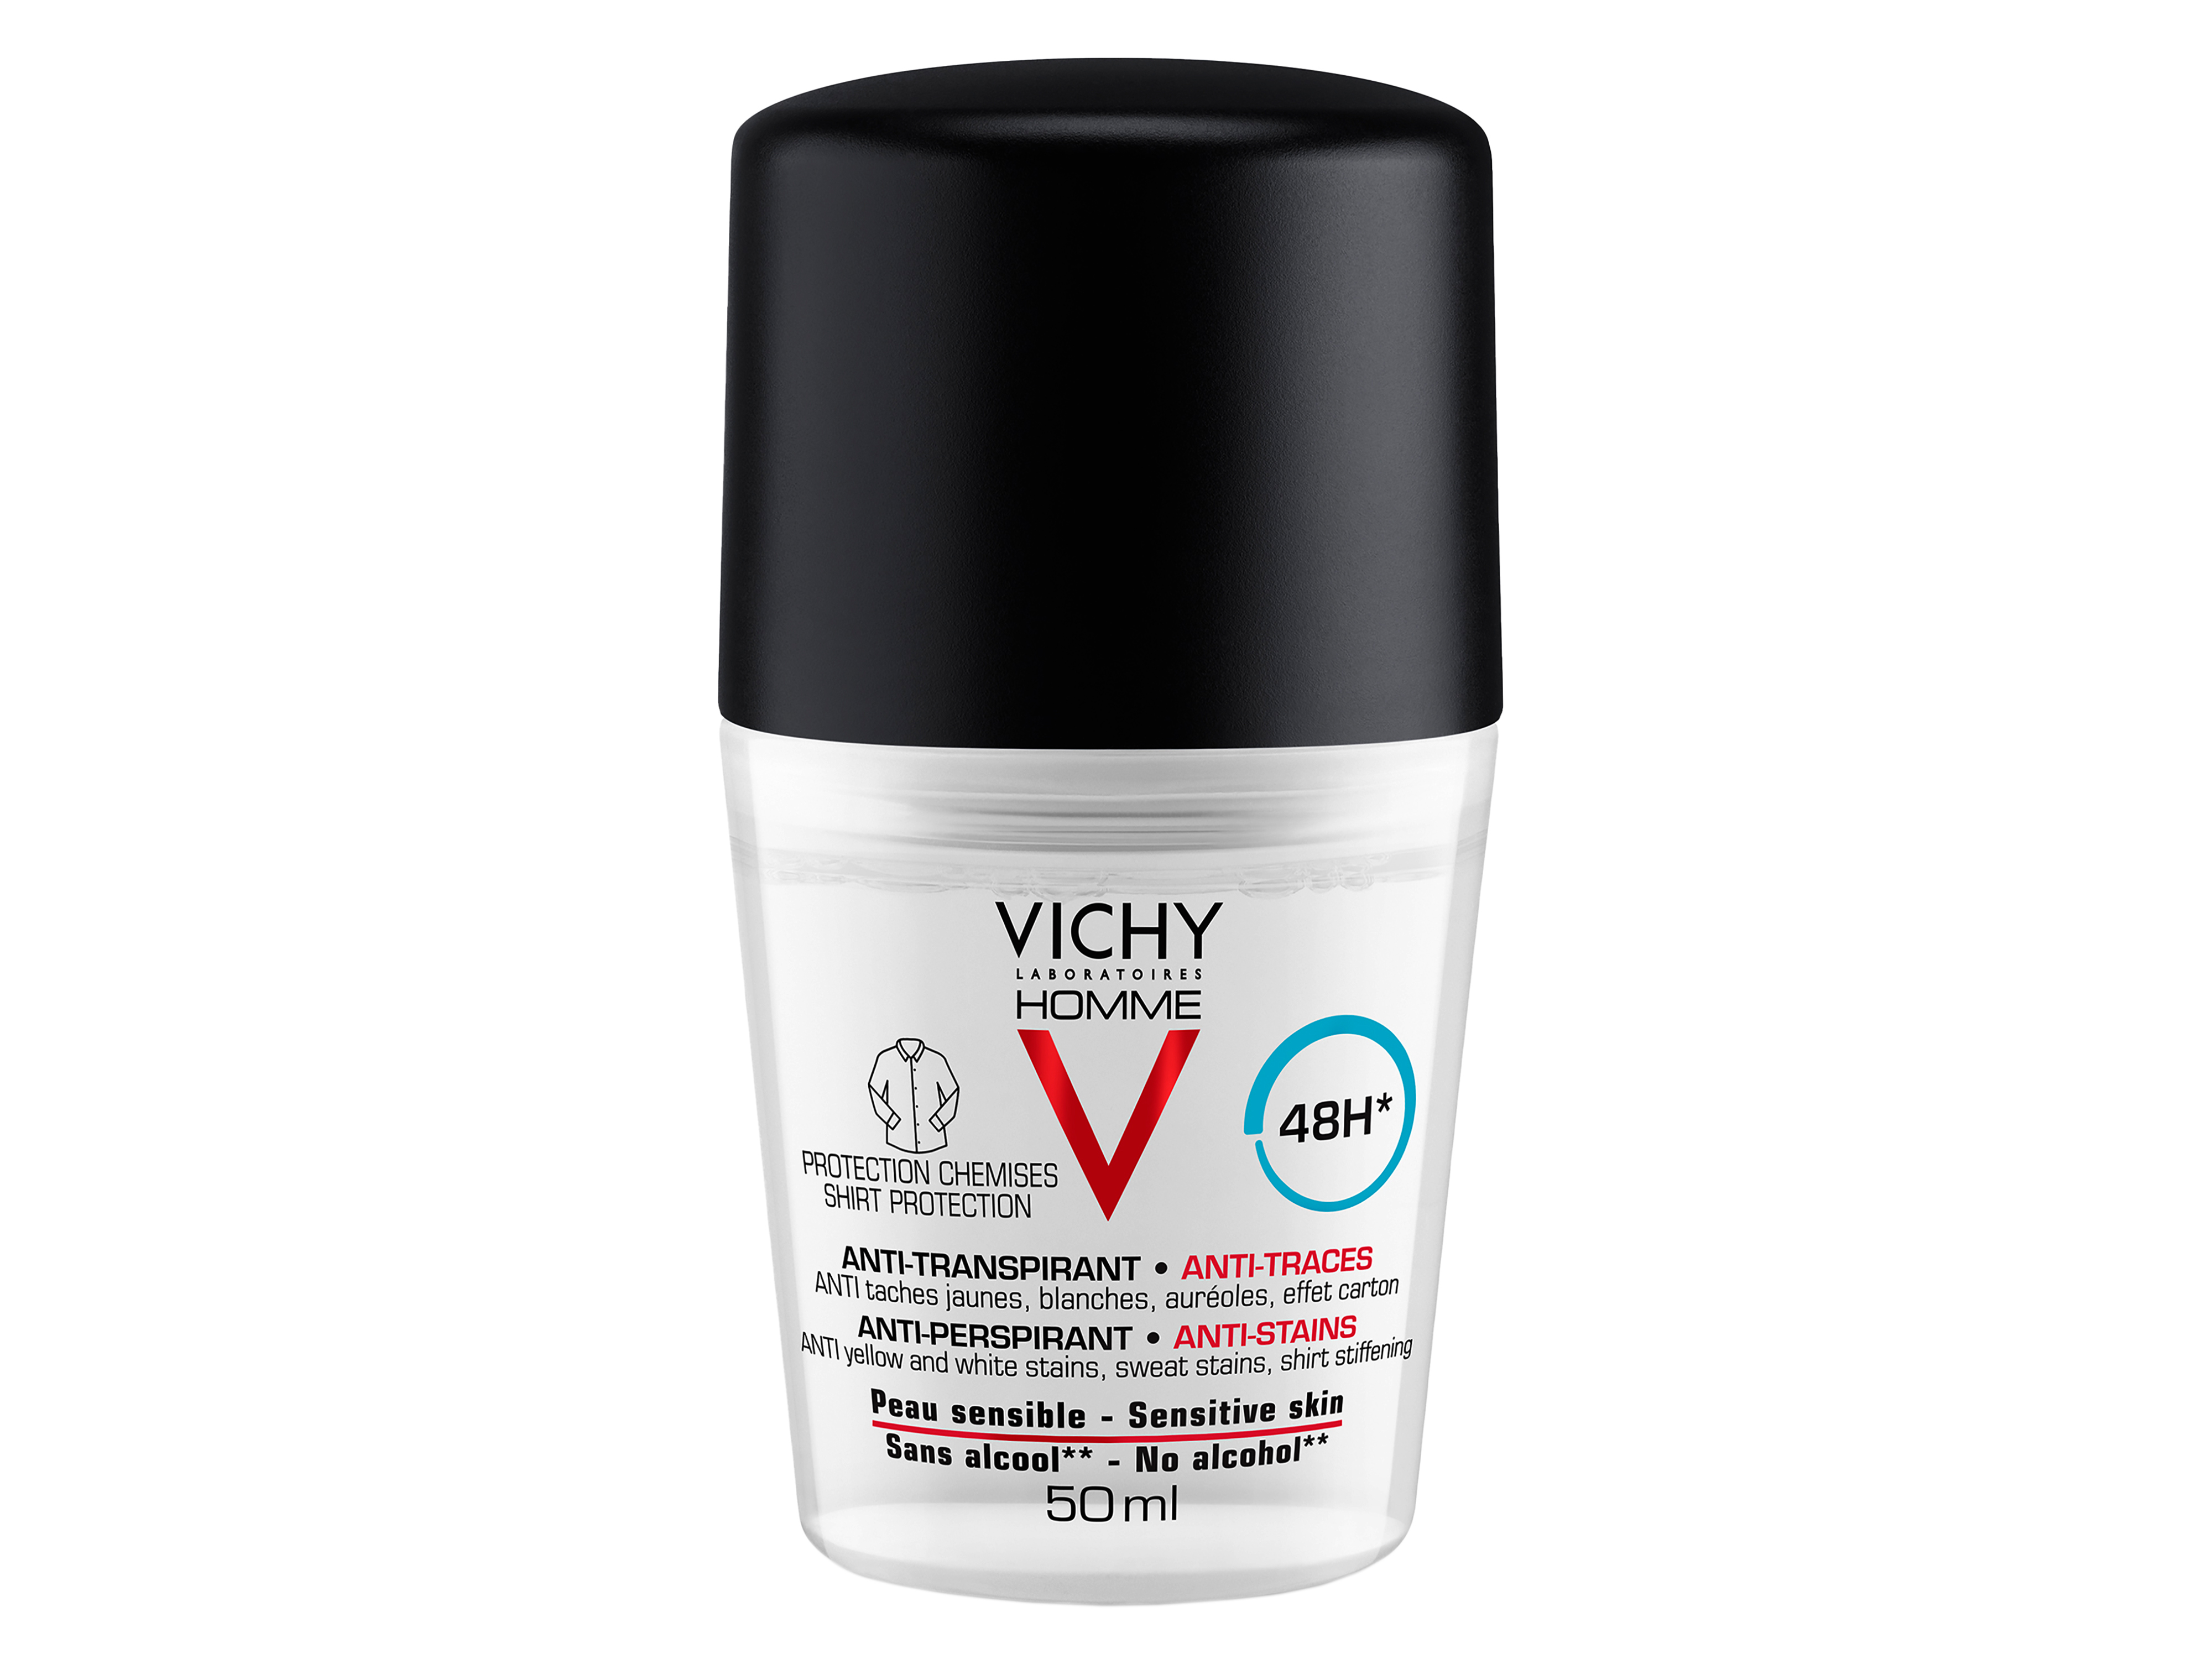 Vichy Homme Anti-Perspirant Anti-Stains 48H, 50 ml